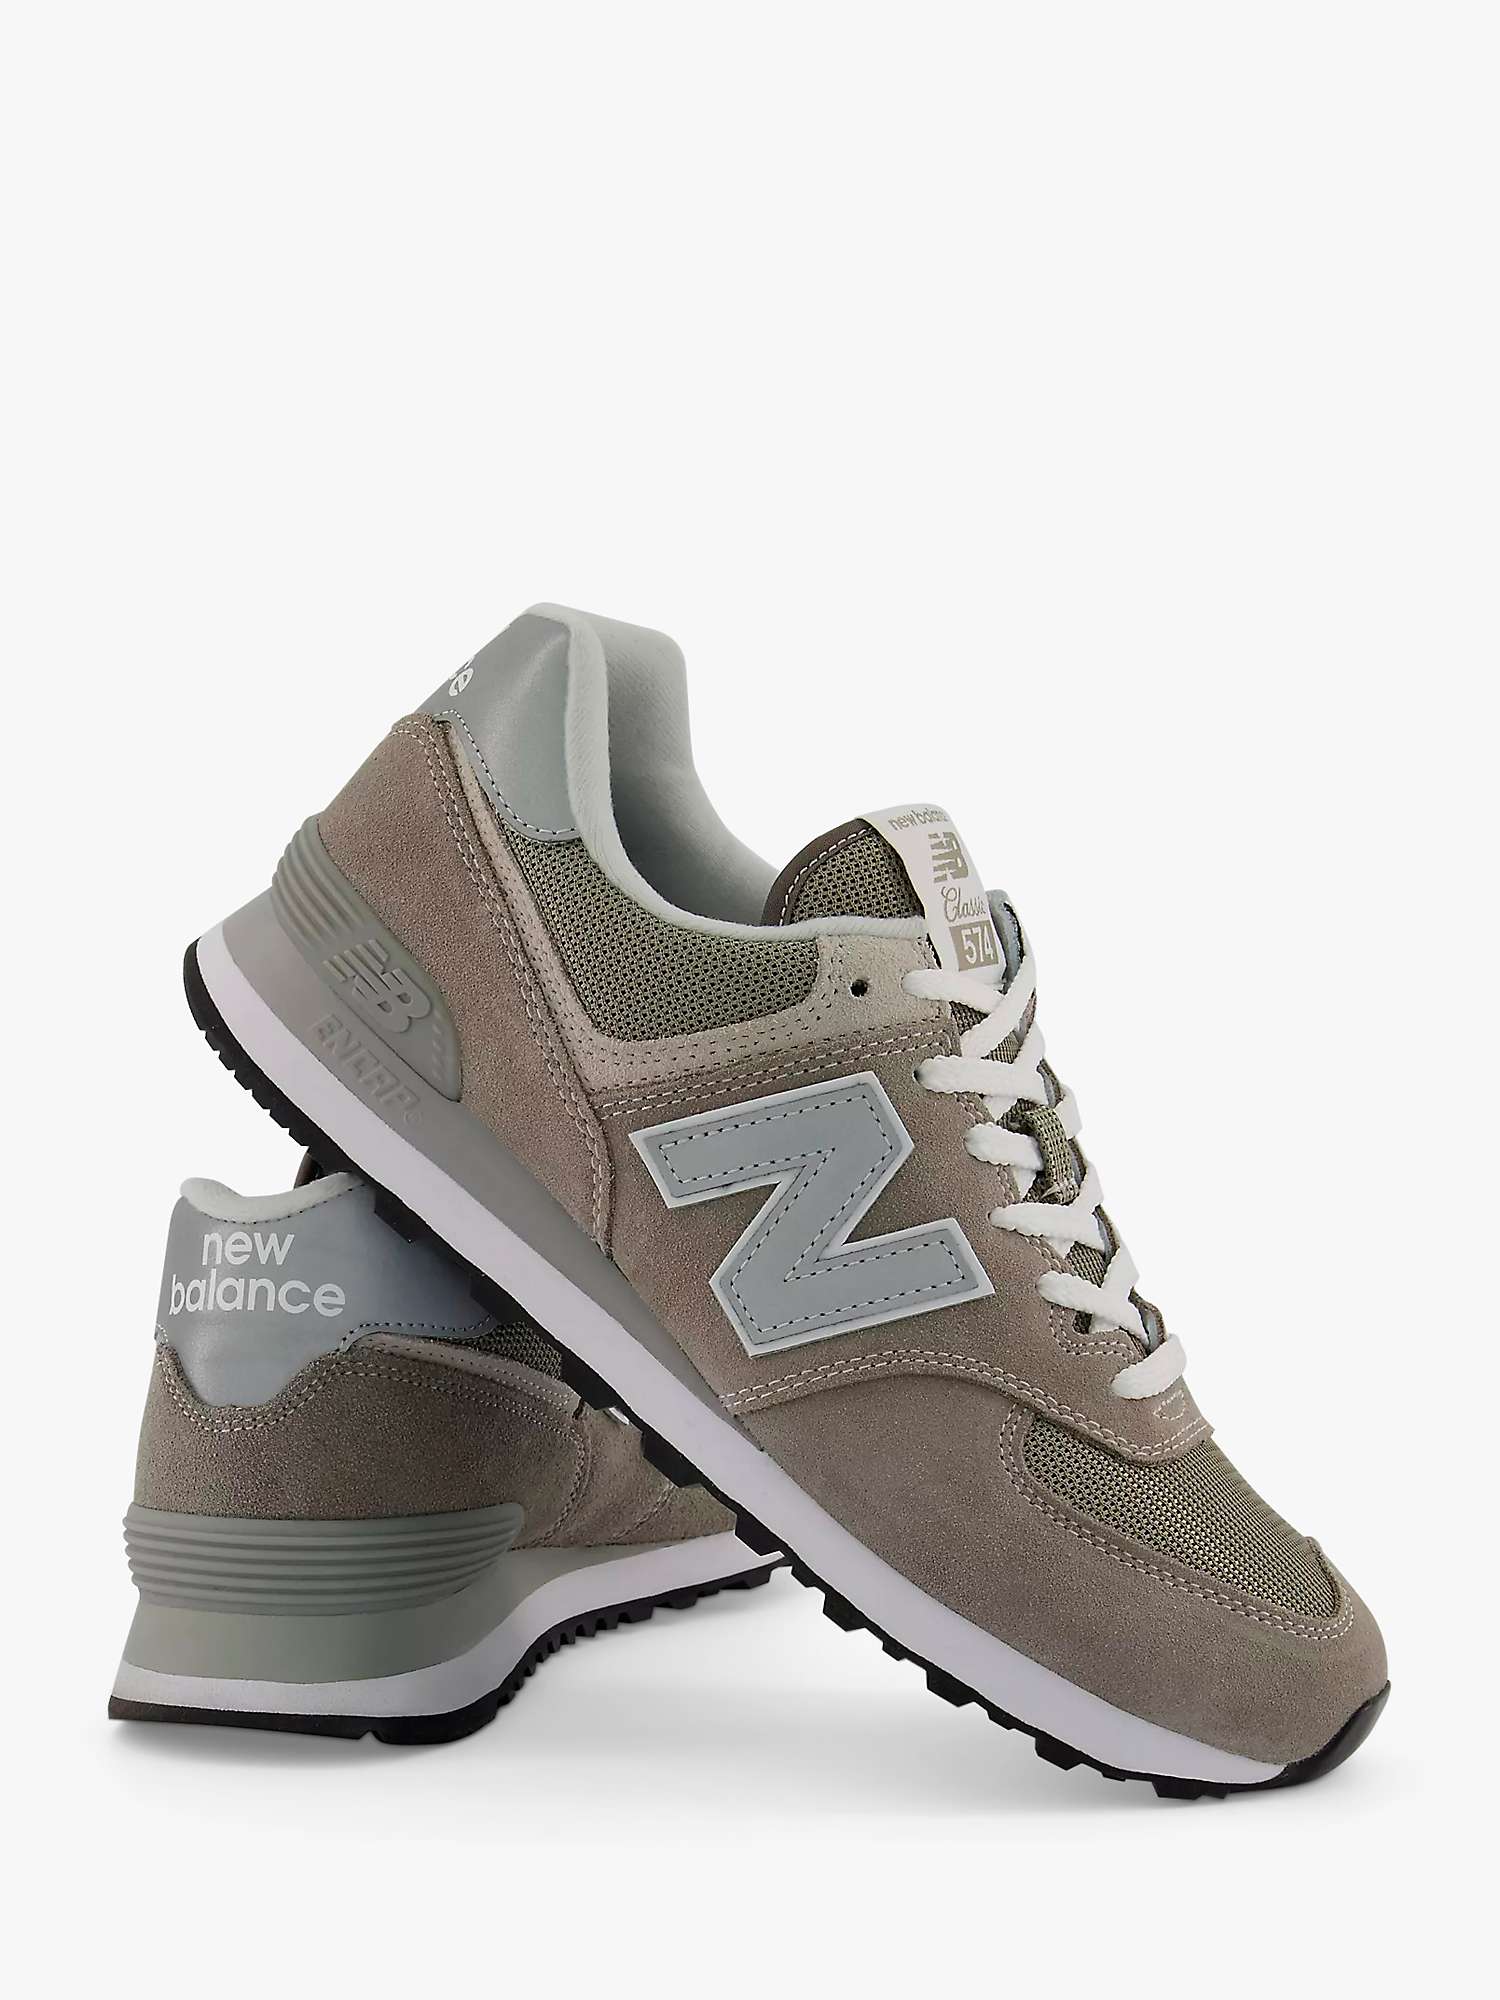 New Balance 574 Suede Trainers, Grey at John Lewis & Partners